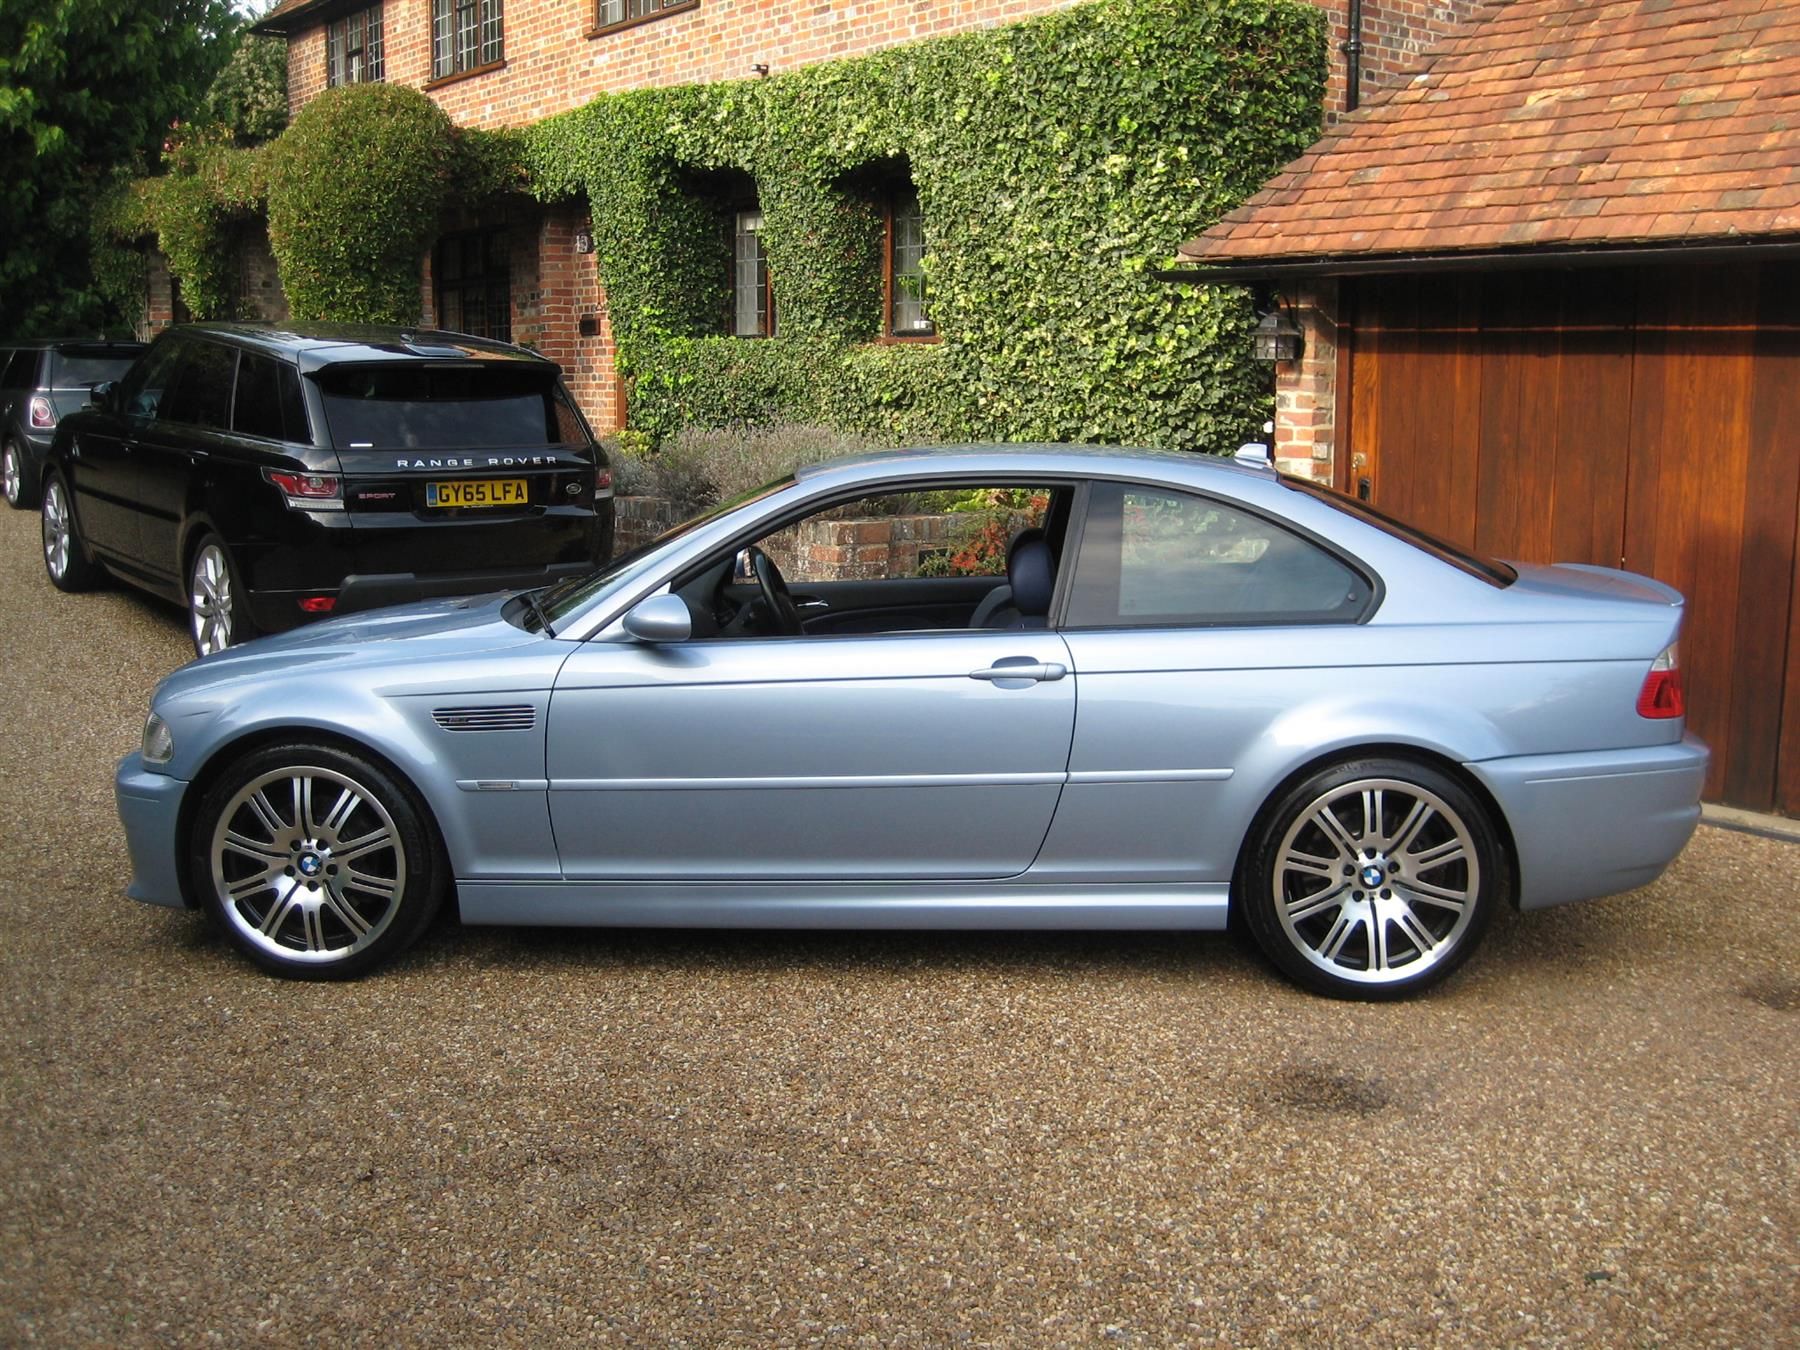 BMW E46 M3 6 SPEED MANUAL VERY RARE SILVERSTONE EDITION WITH ONLY 38,000 MILES 2005